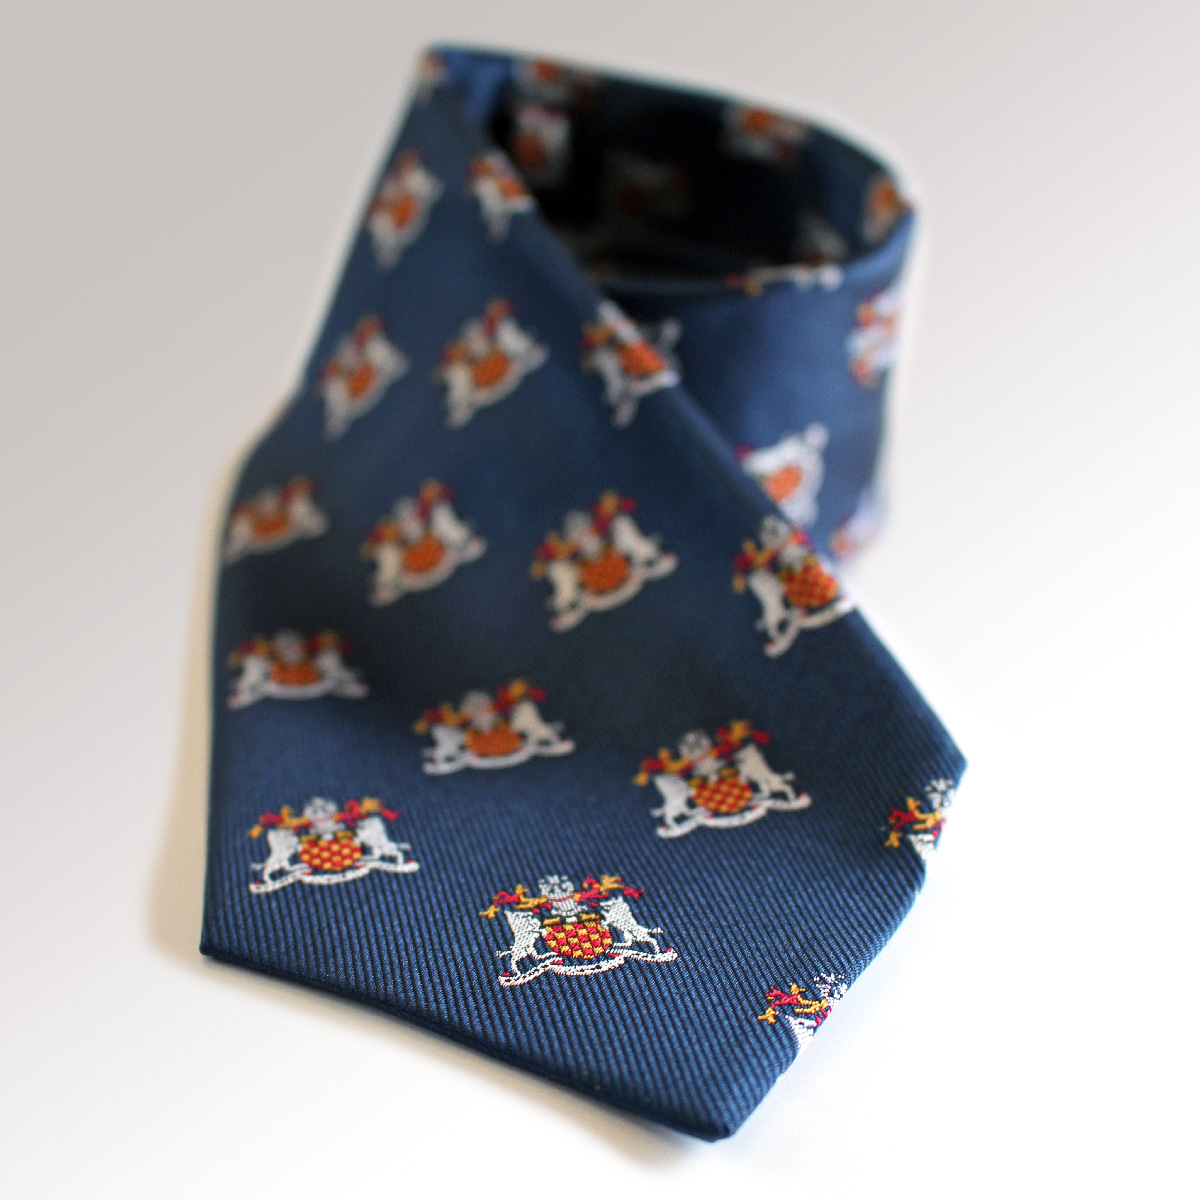 Tie with coat of arms on it